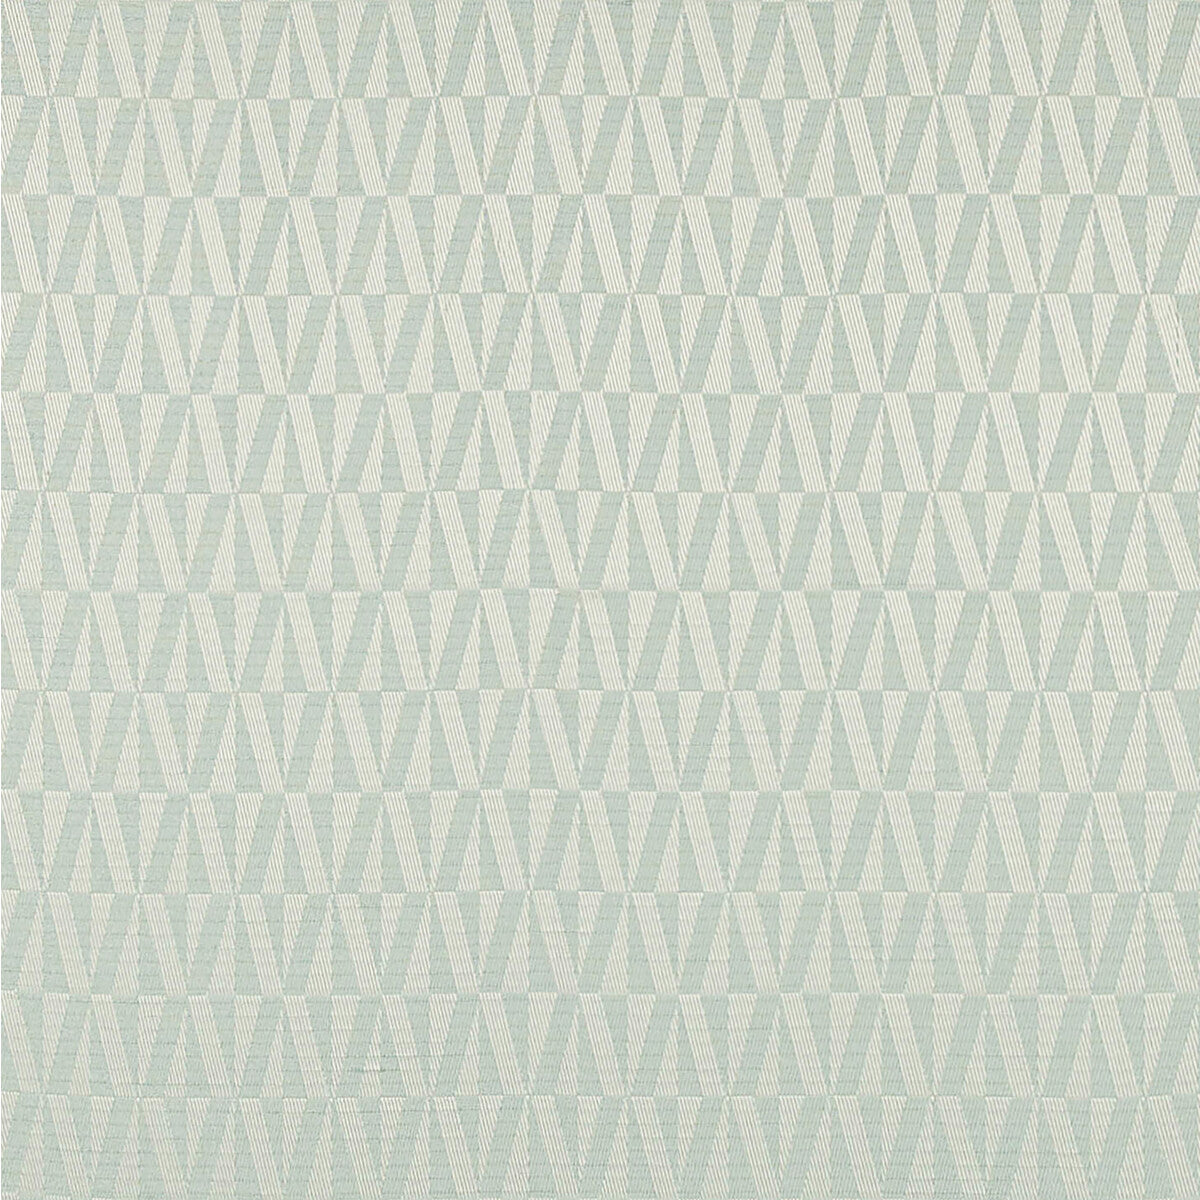 Payton fabric in sea glass color - pattern 4656.135.0 - by Kravet Contract